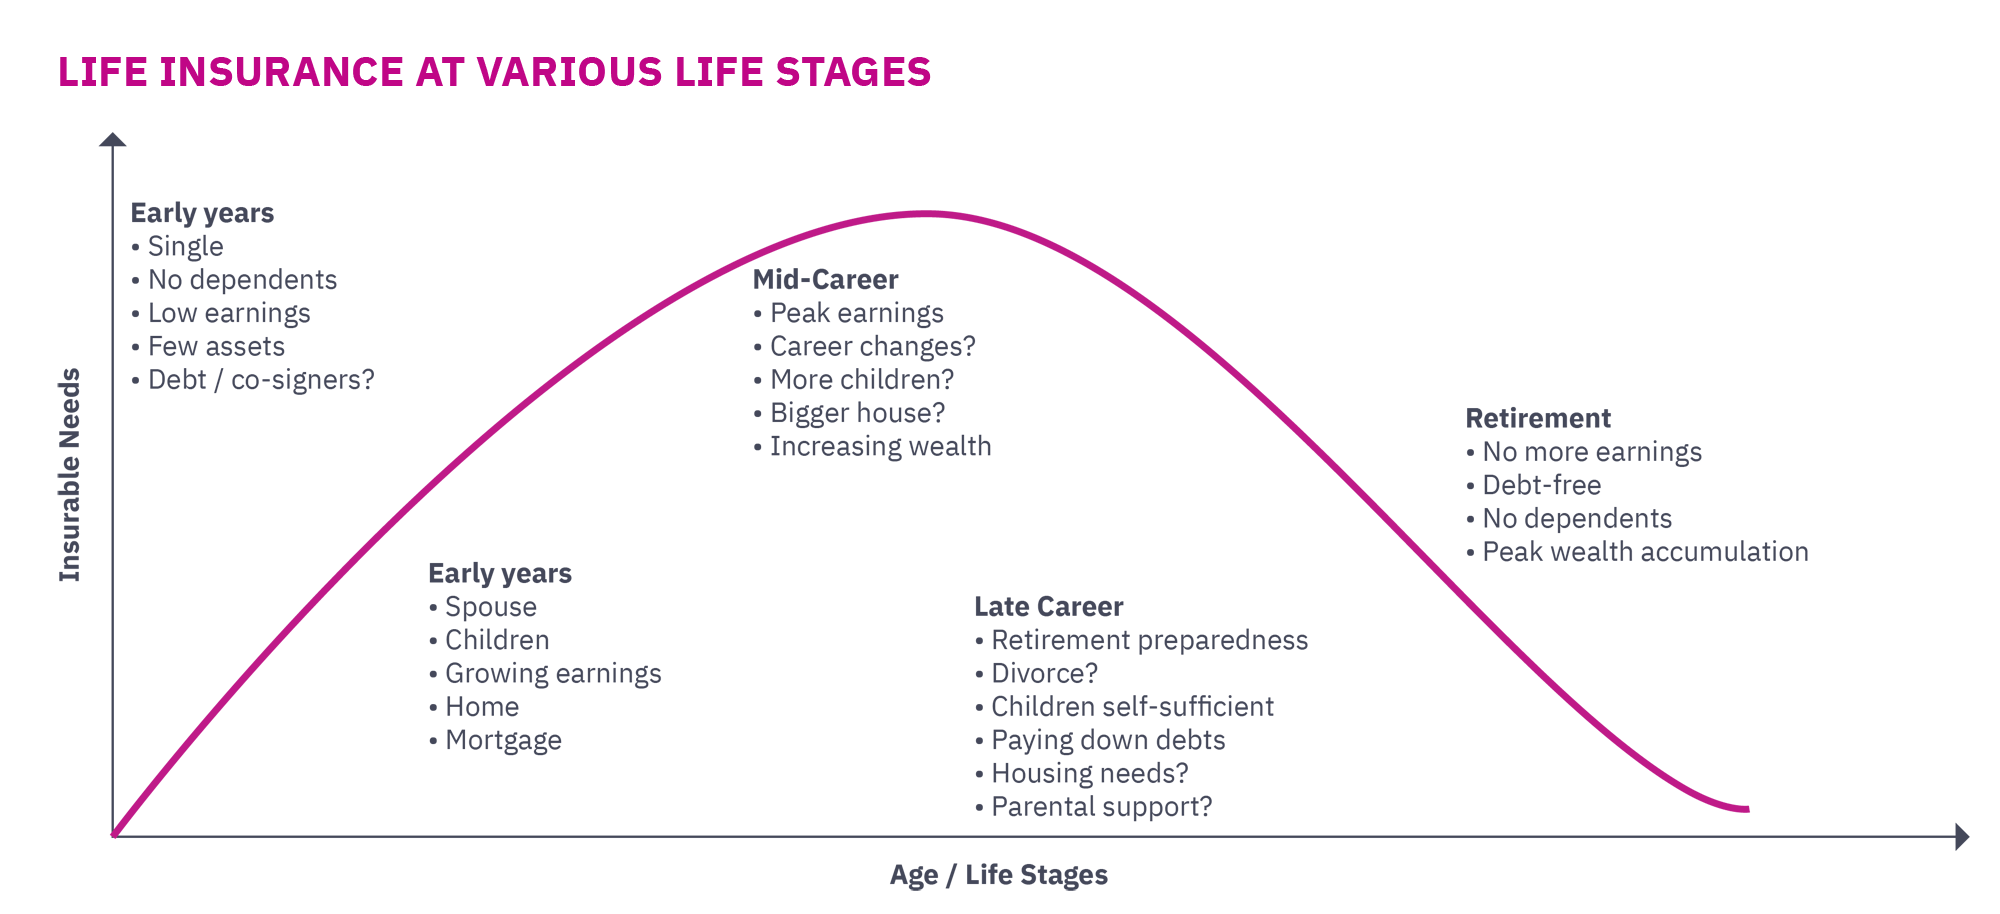 Life insurance of various life stages